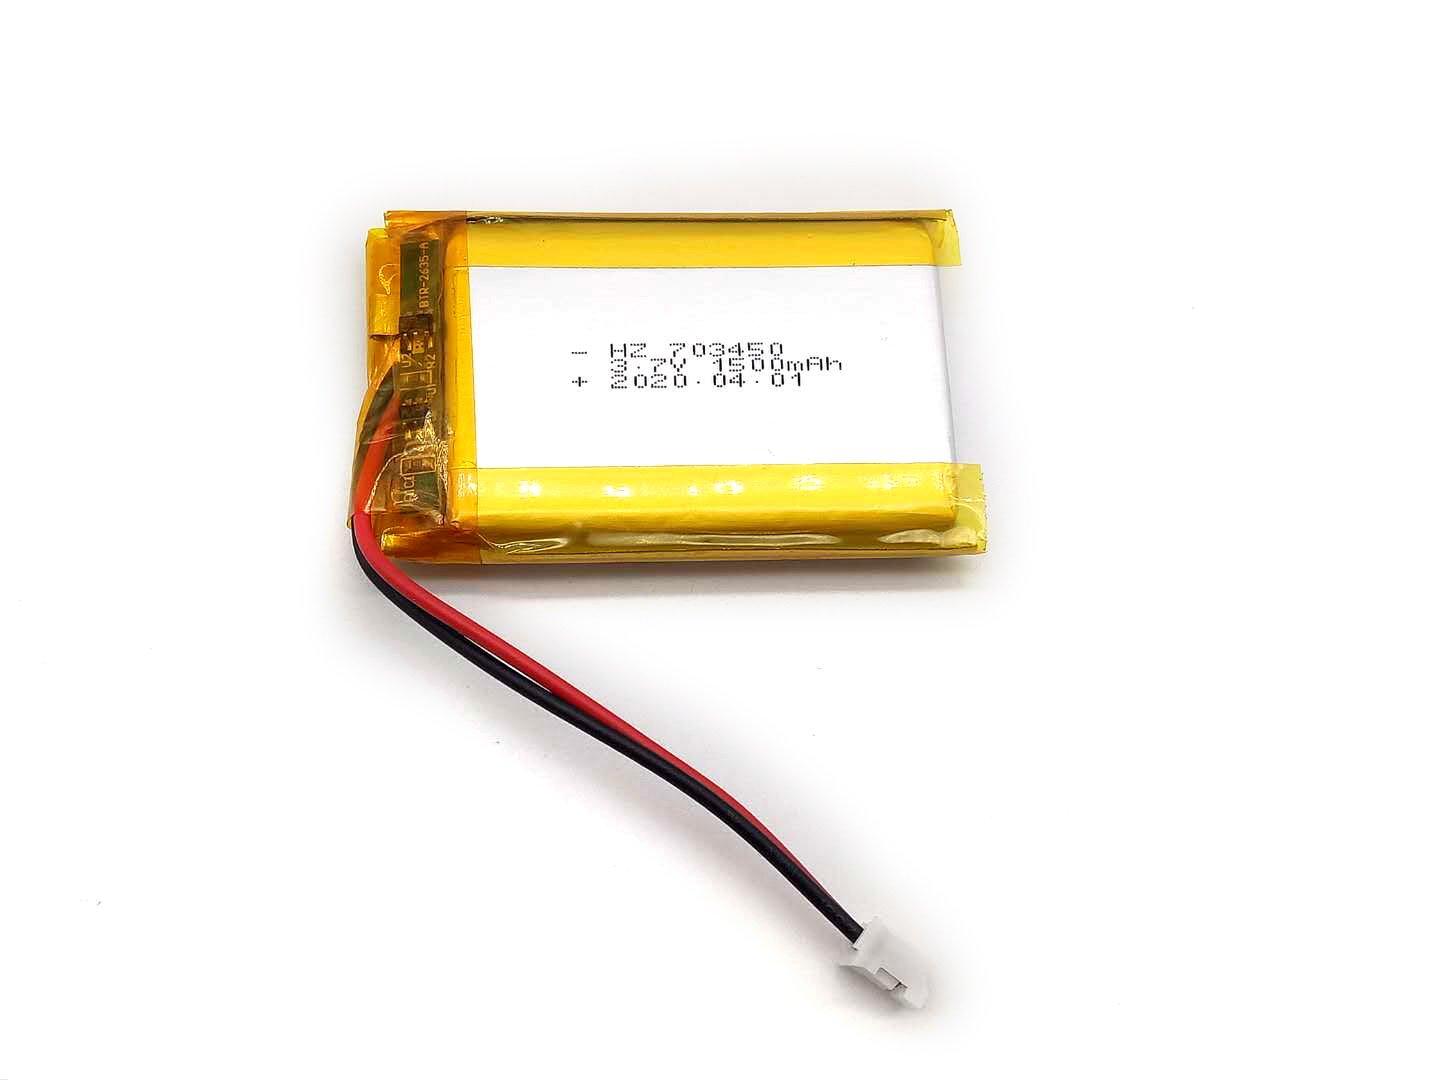 Product Rechargeable li-polymer lithium battery 3.7v 1500mah 703450 with PCB - VATS BATTERY image